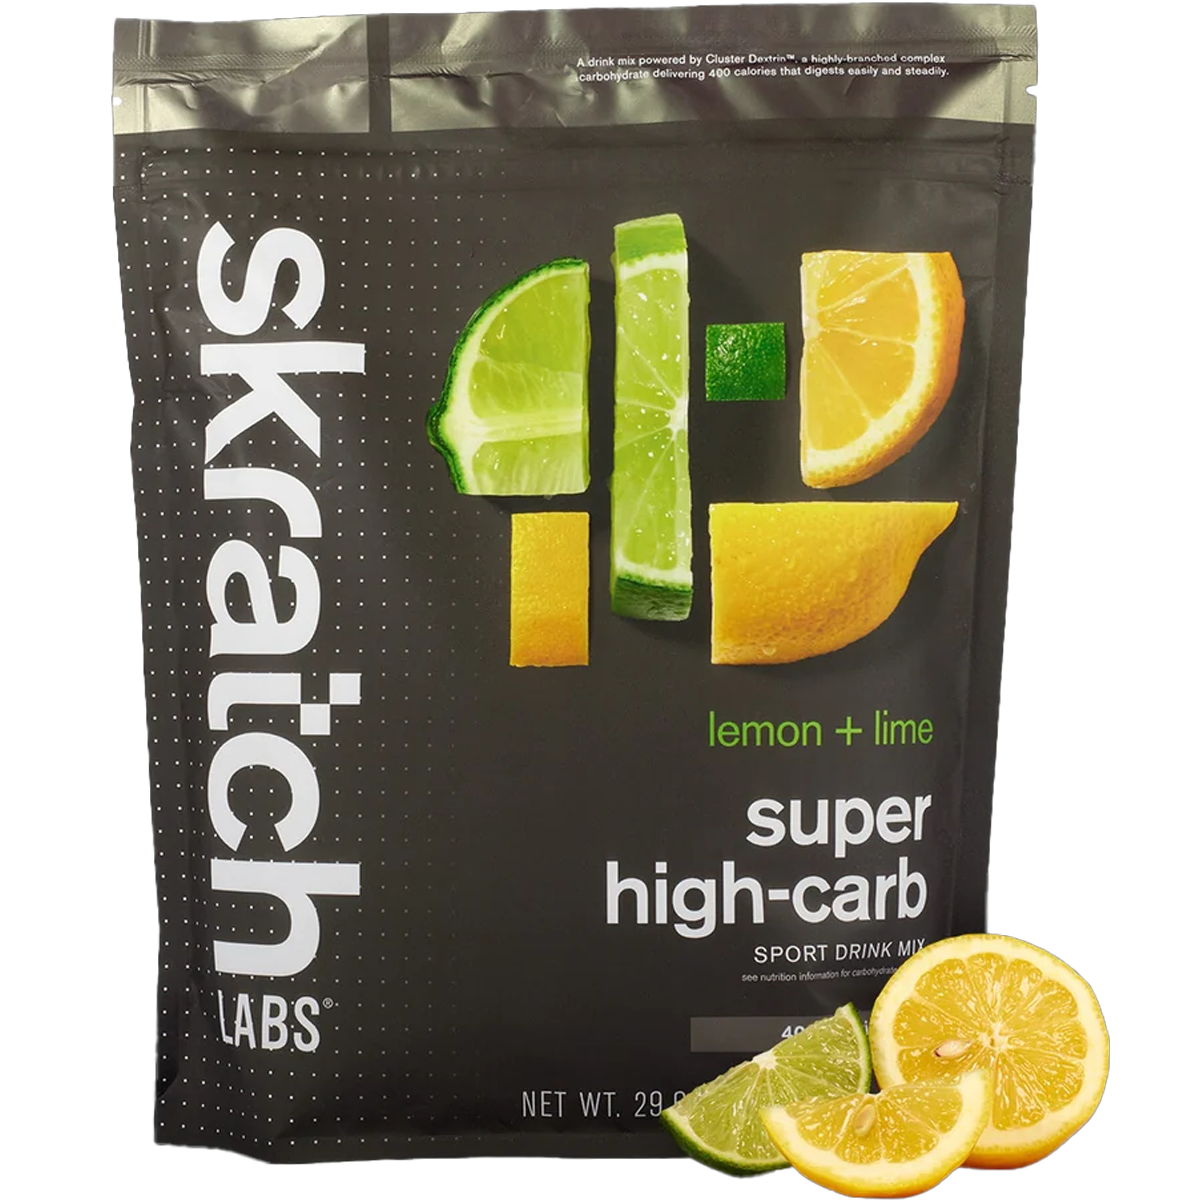 Super High-Carb Drink Mix (8 Servings) alternate view